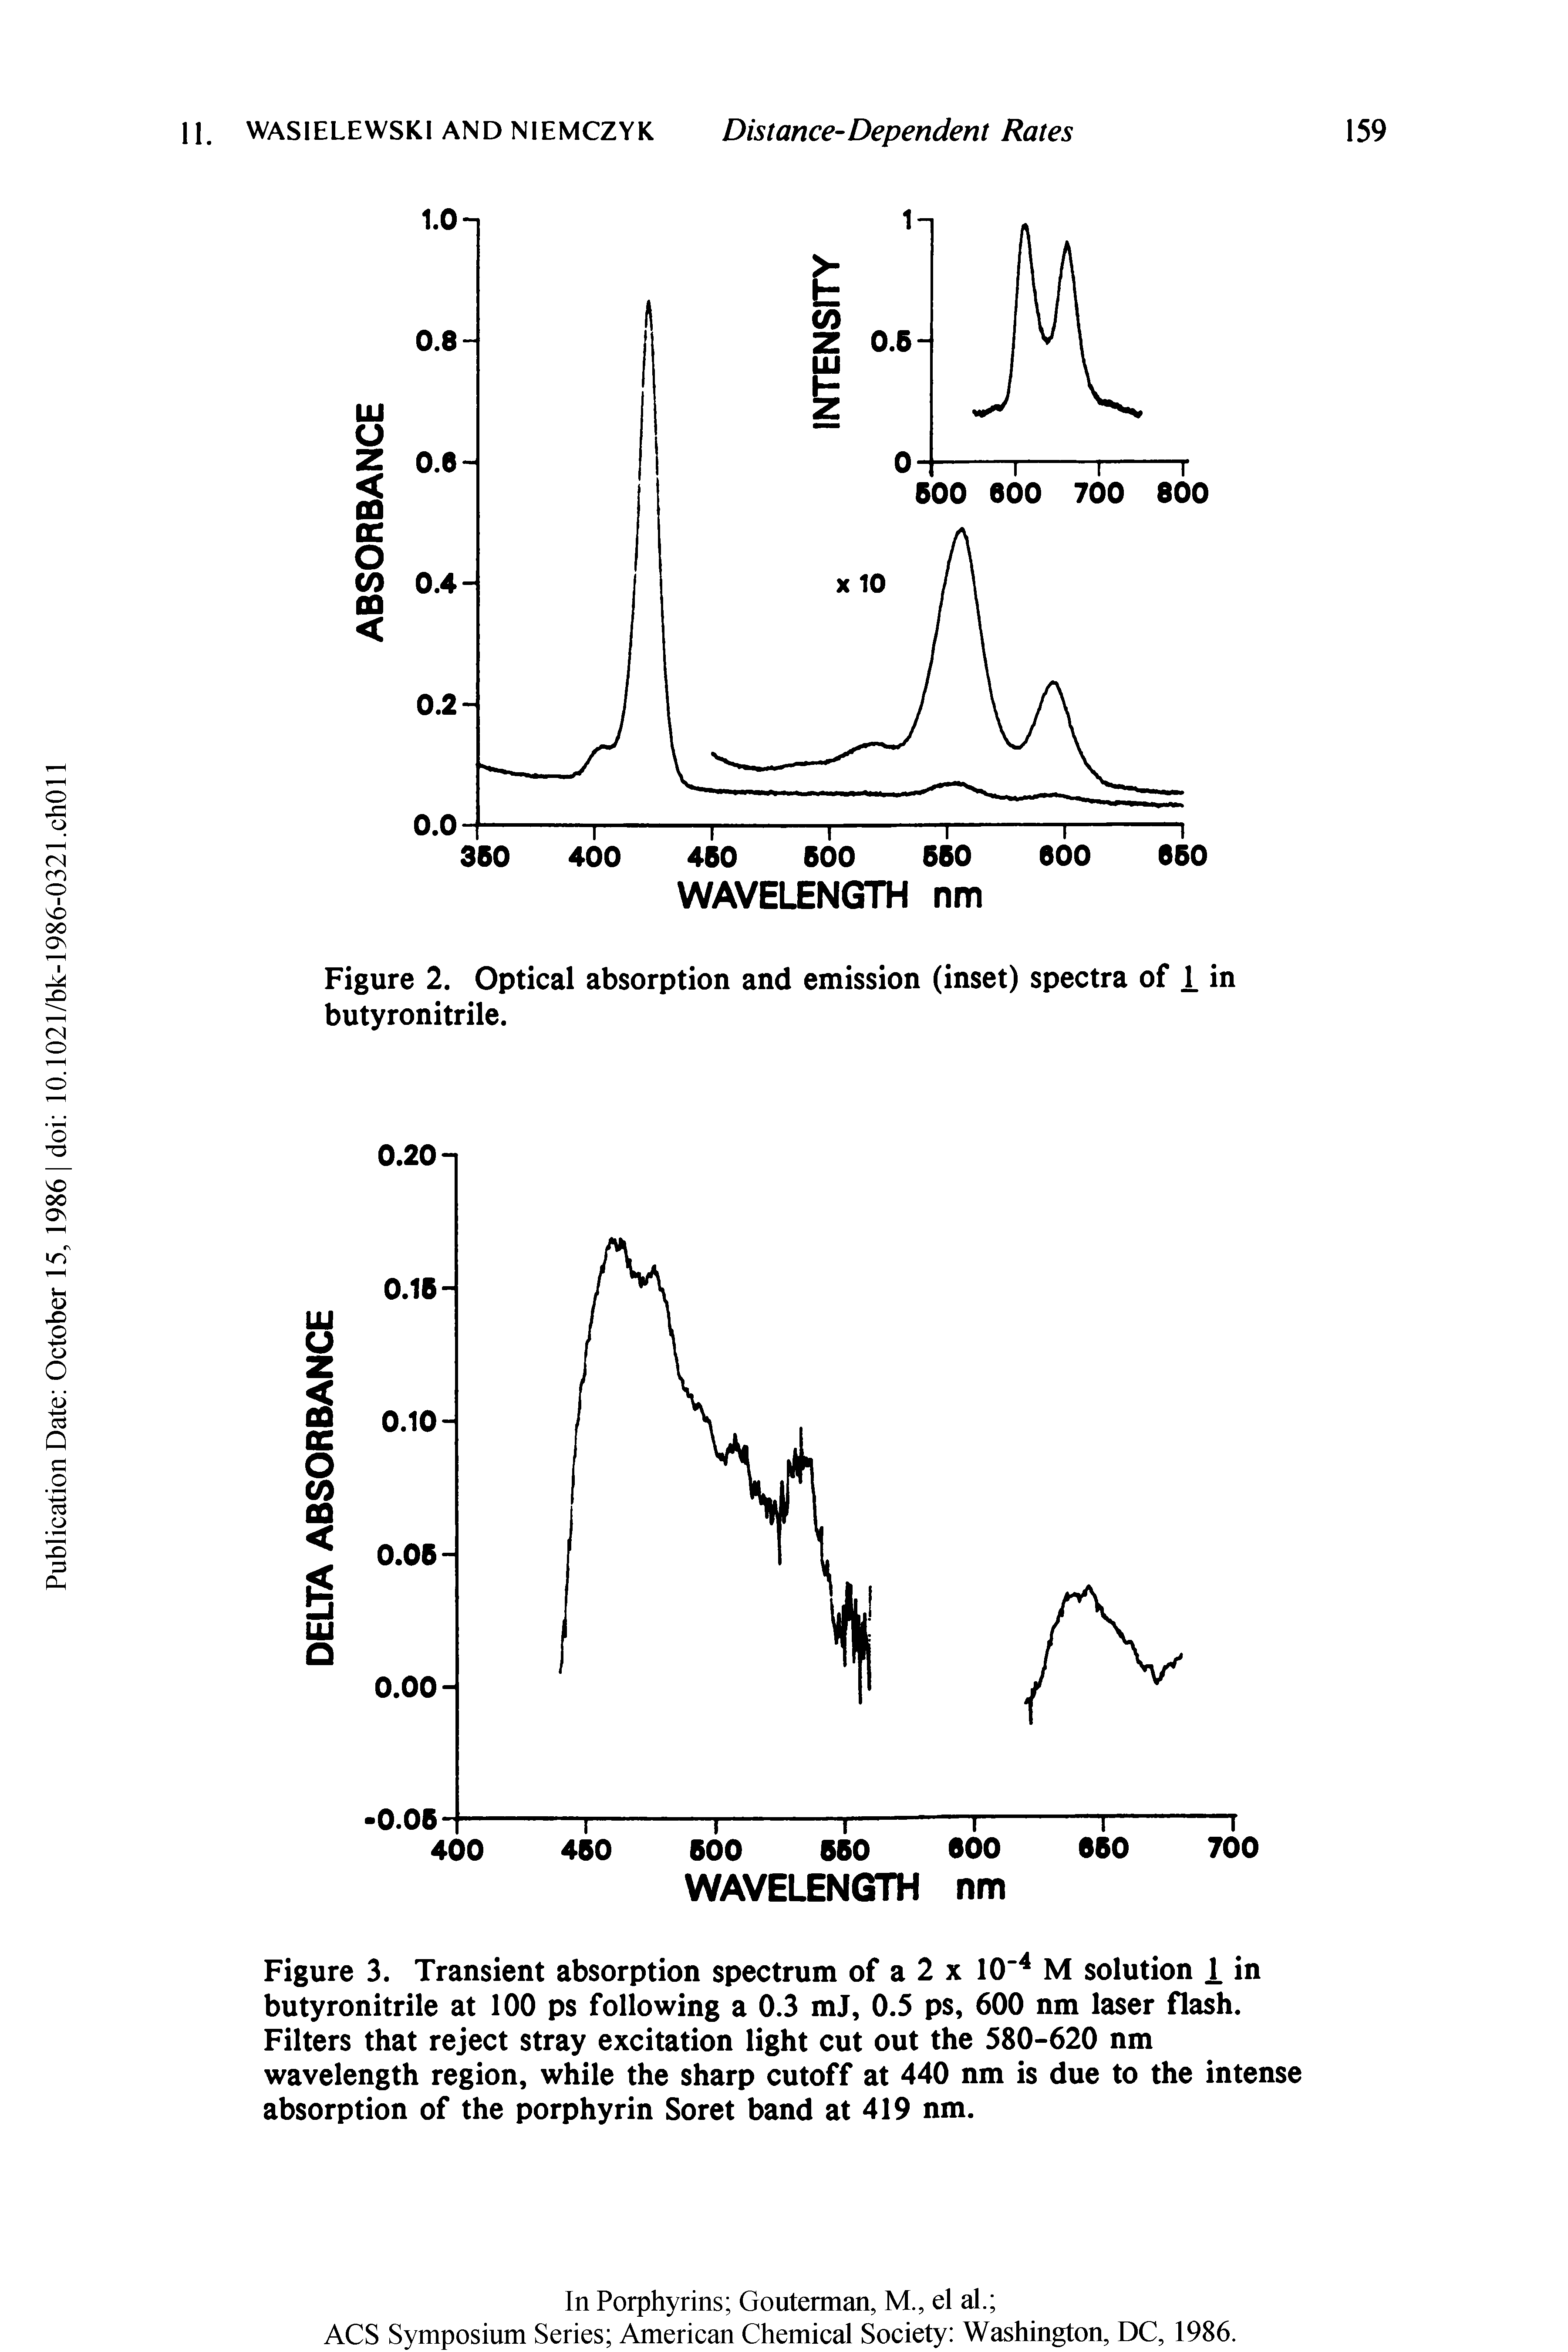 Figure 3. Transient absorption spectrum of a 2 x 10 M solution i in butyronitrile at 100 ps following a 0.3 mJ, 0.5 ps, 600 nm laser flash. Filters that reject stray excitation light cut out the 580-620 nm wavelength region, while the sharp cutoff at 440 nm is due to the intense absorption of the porphyrin Soret band at 419 nm.